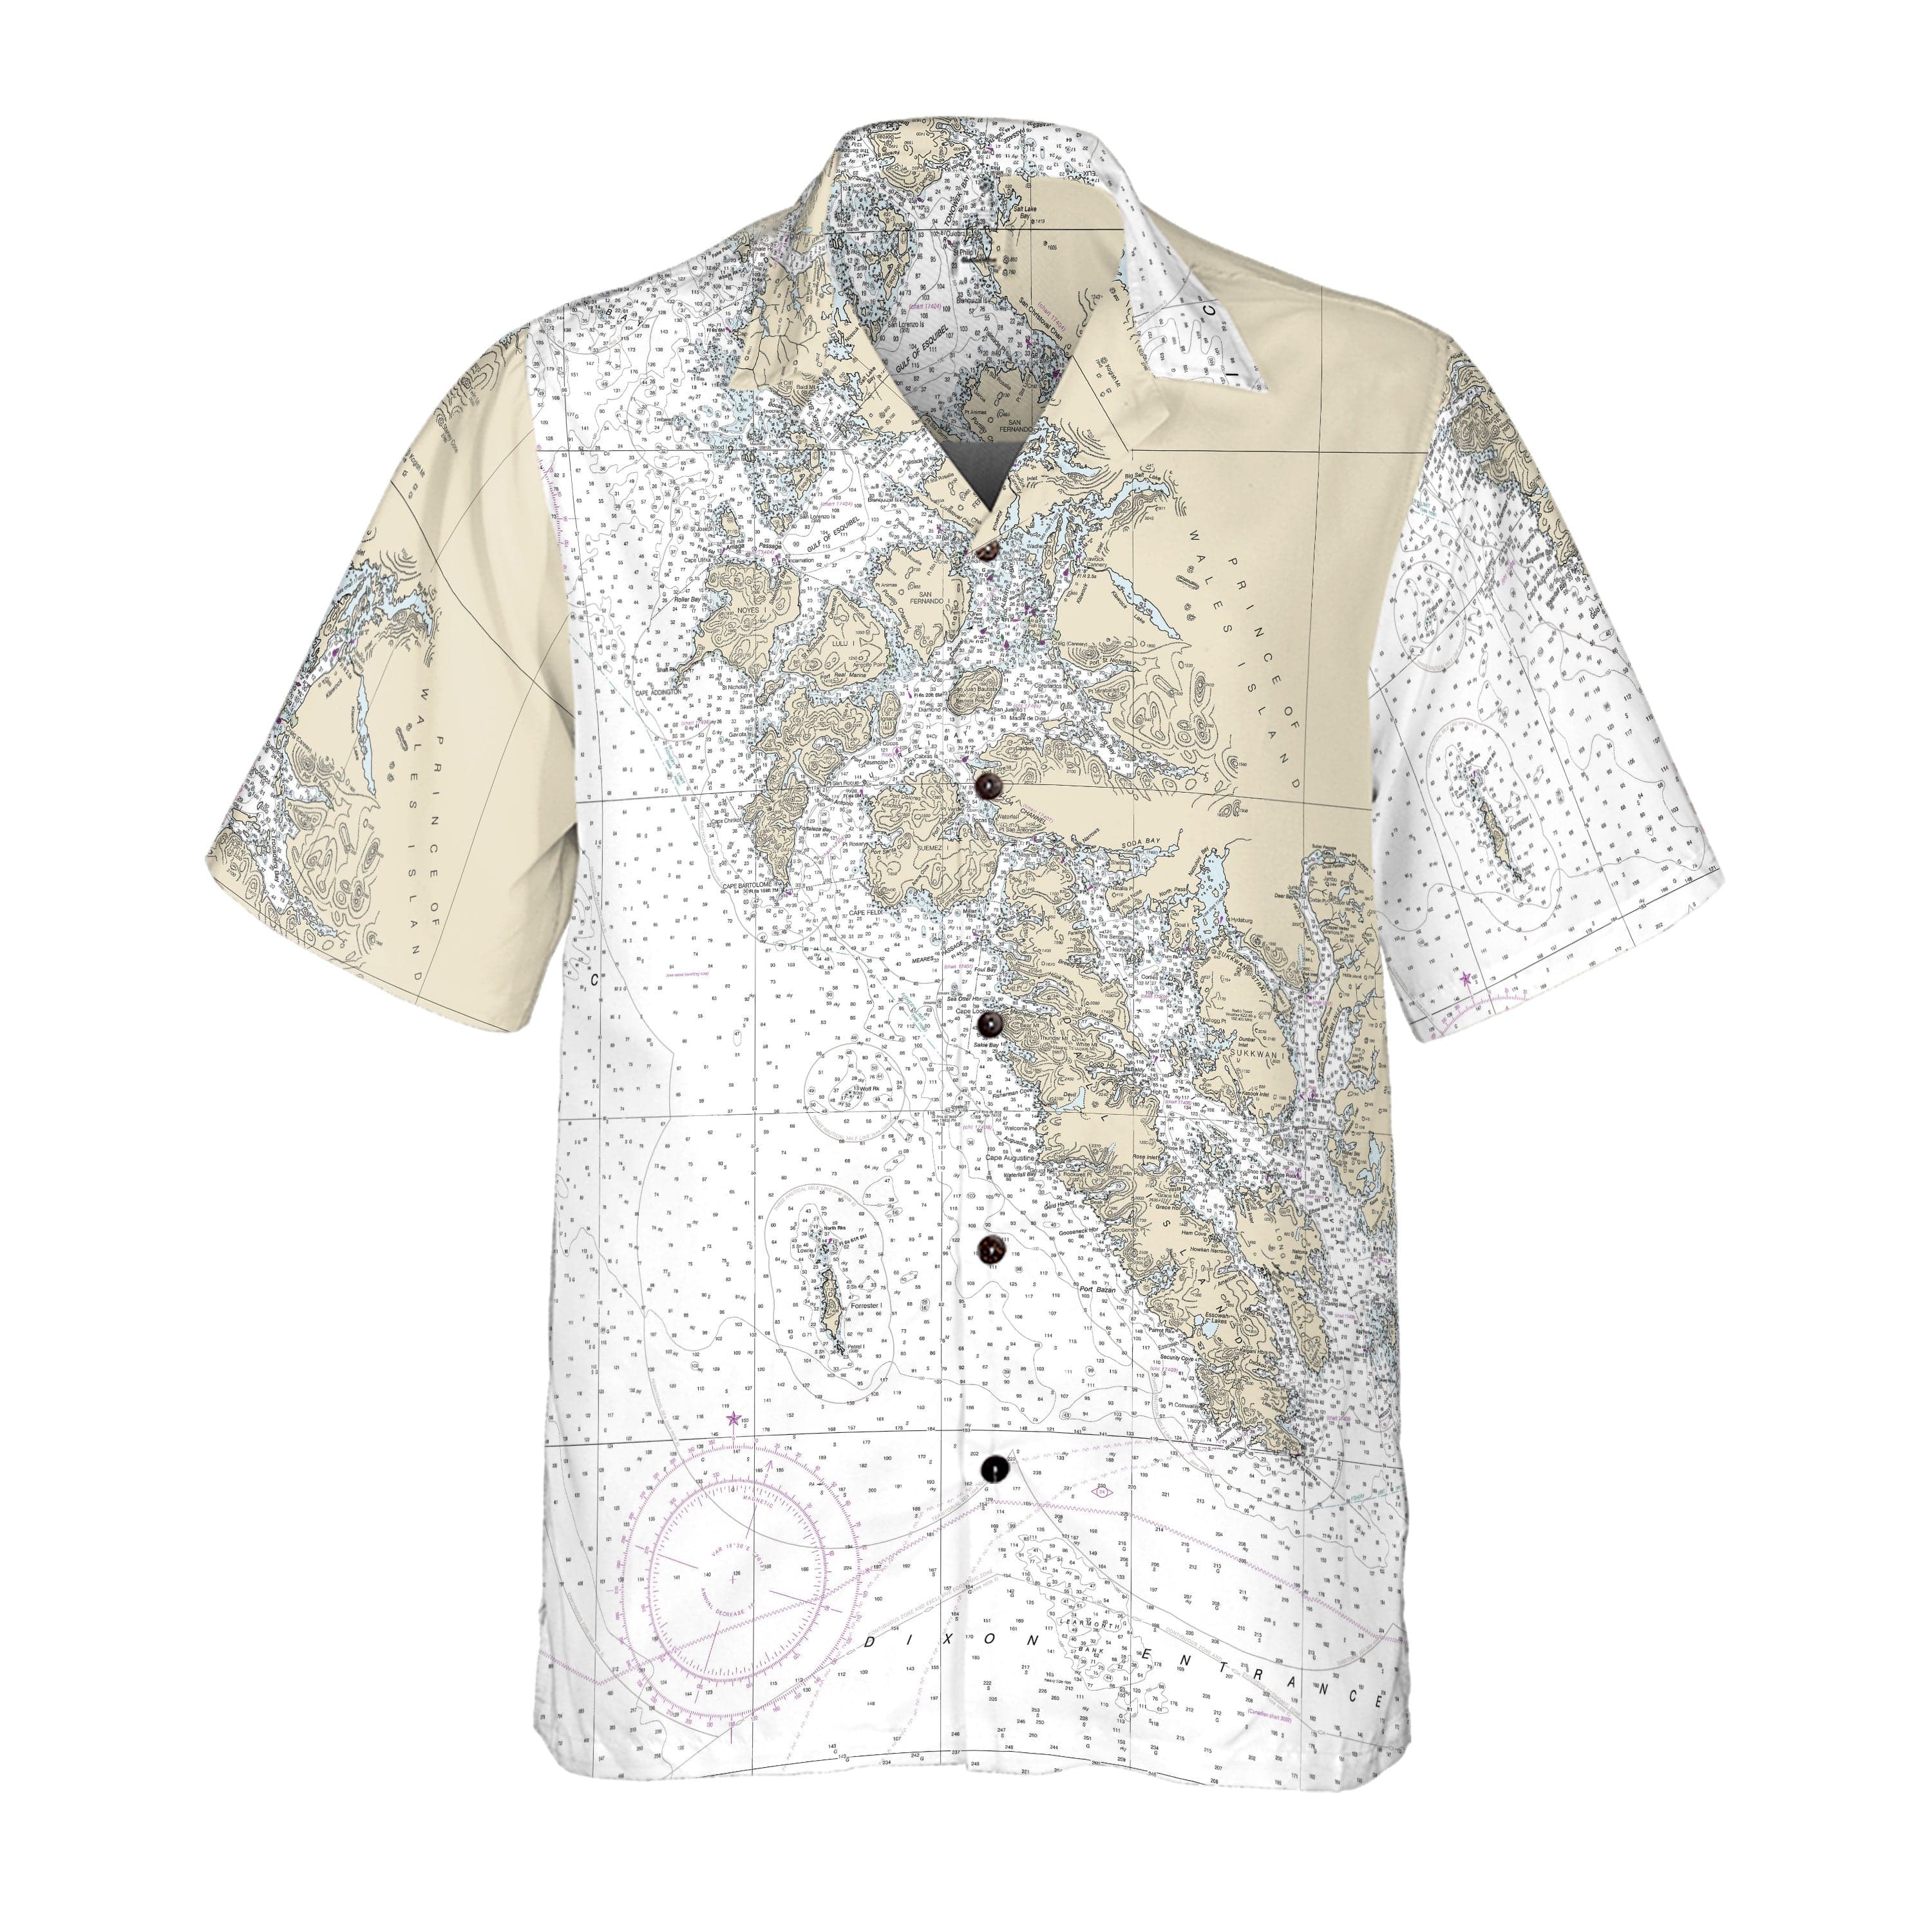 The Gulf of Esquibel to Dixon Entrance Coconut Button Camp Shirt